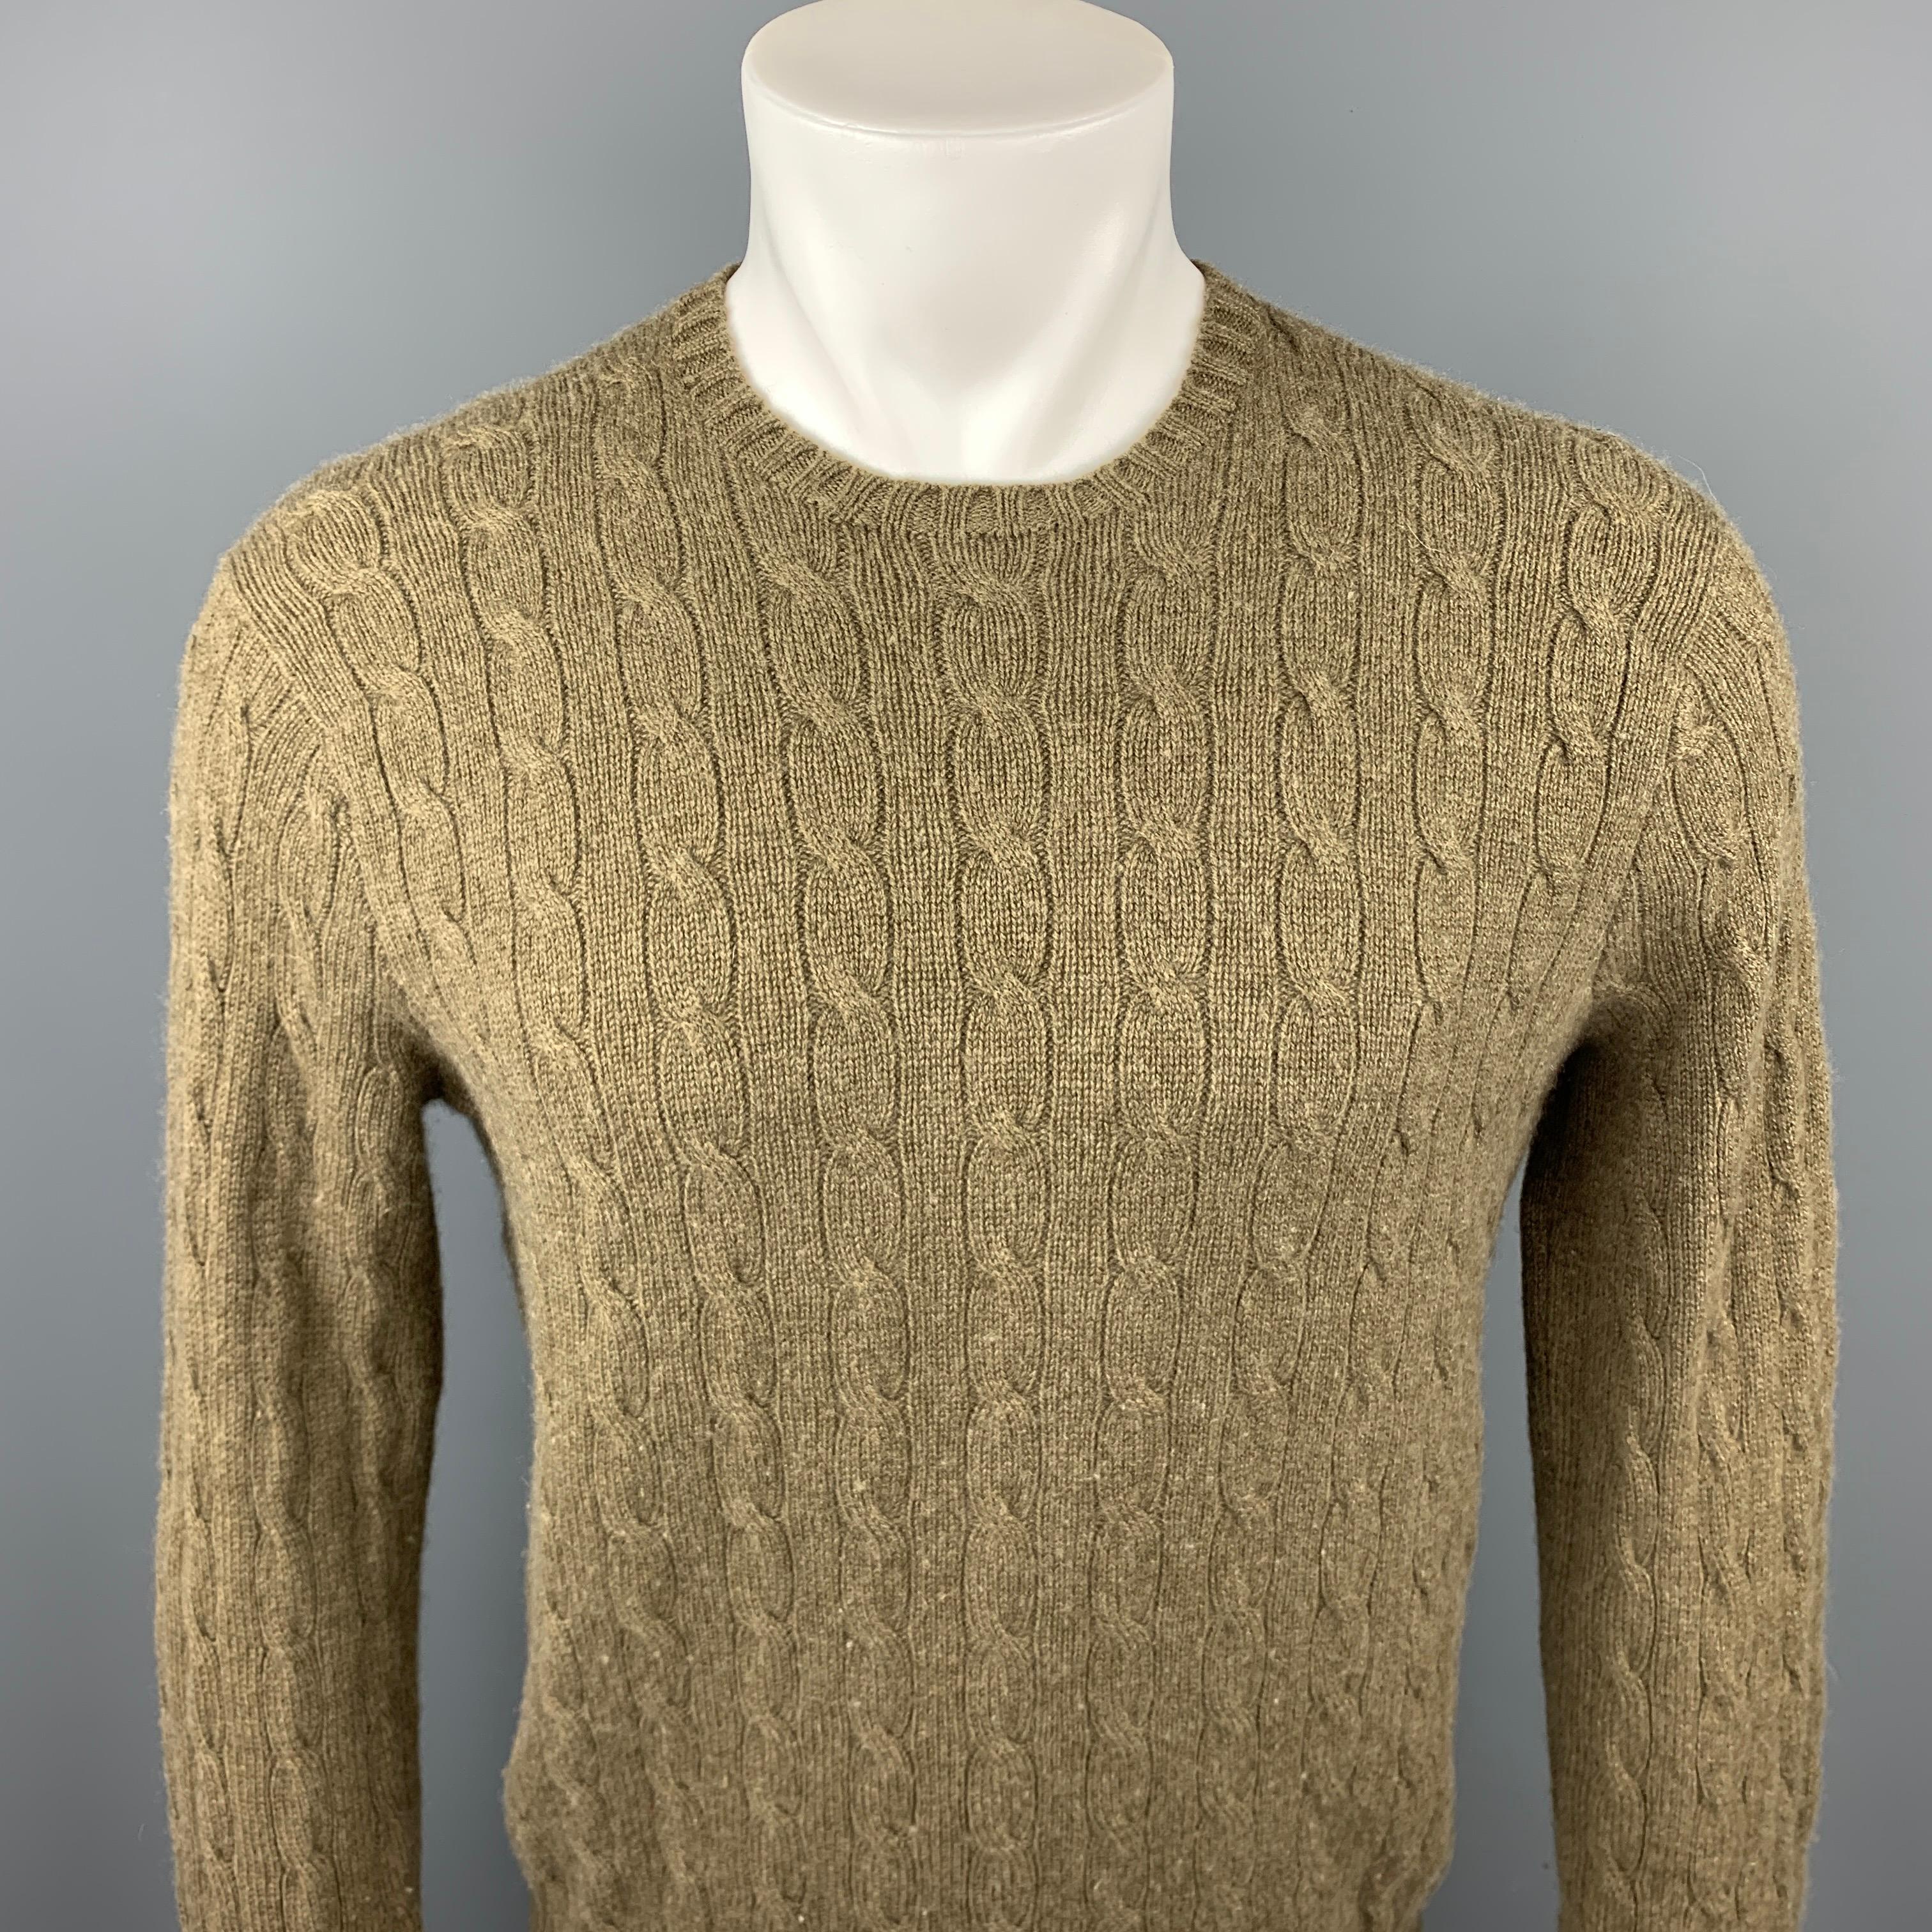 RALPH LAUREN sweater comes in a olive cable knit cashmere featuring a crew-neck.

Very Good Pre-Owned Condition.
Marked: M

Measurements:

Shoulder: 19 in. 
Chest: 40 in. 
Sleeve: 31 in. 
Length: 25 in. 